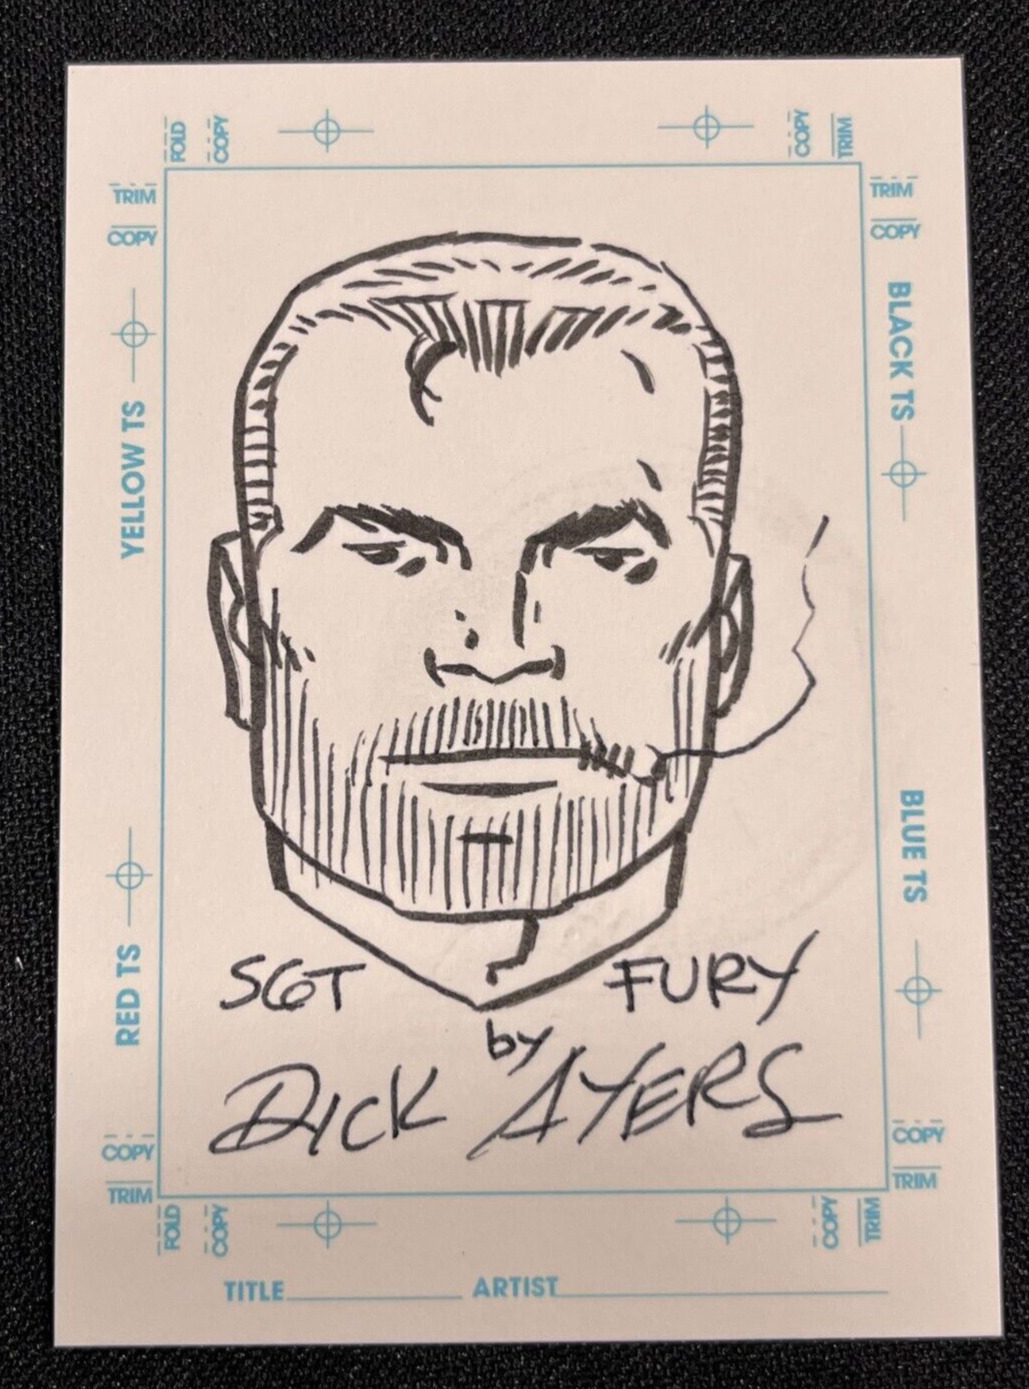 1998 Skybox Sketchagraph Dick Ayers Sgt Nick Fury Sketch Autograph Card AA